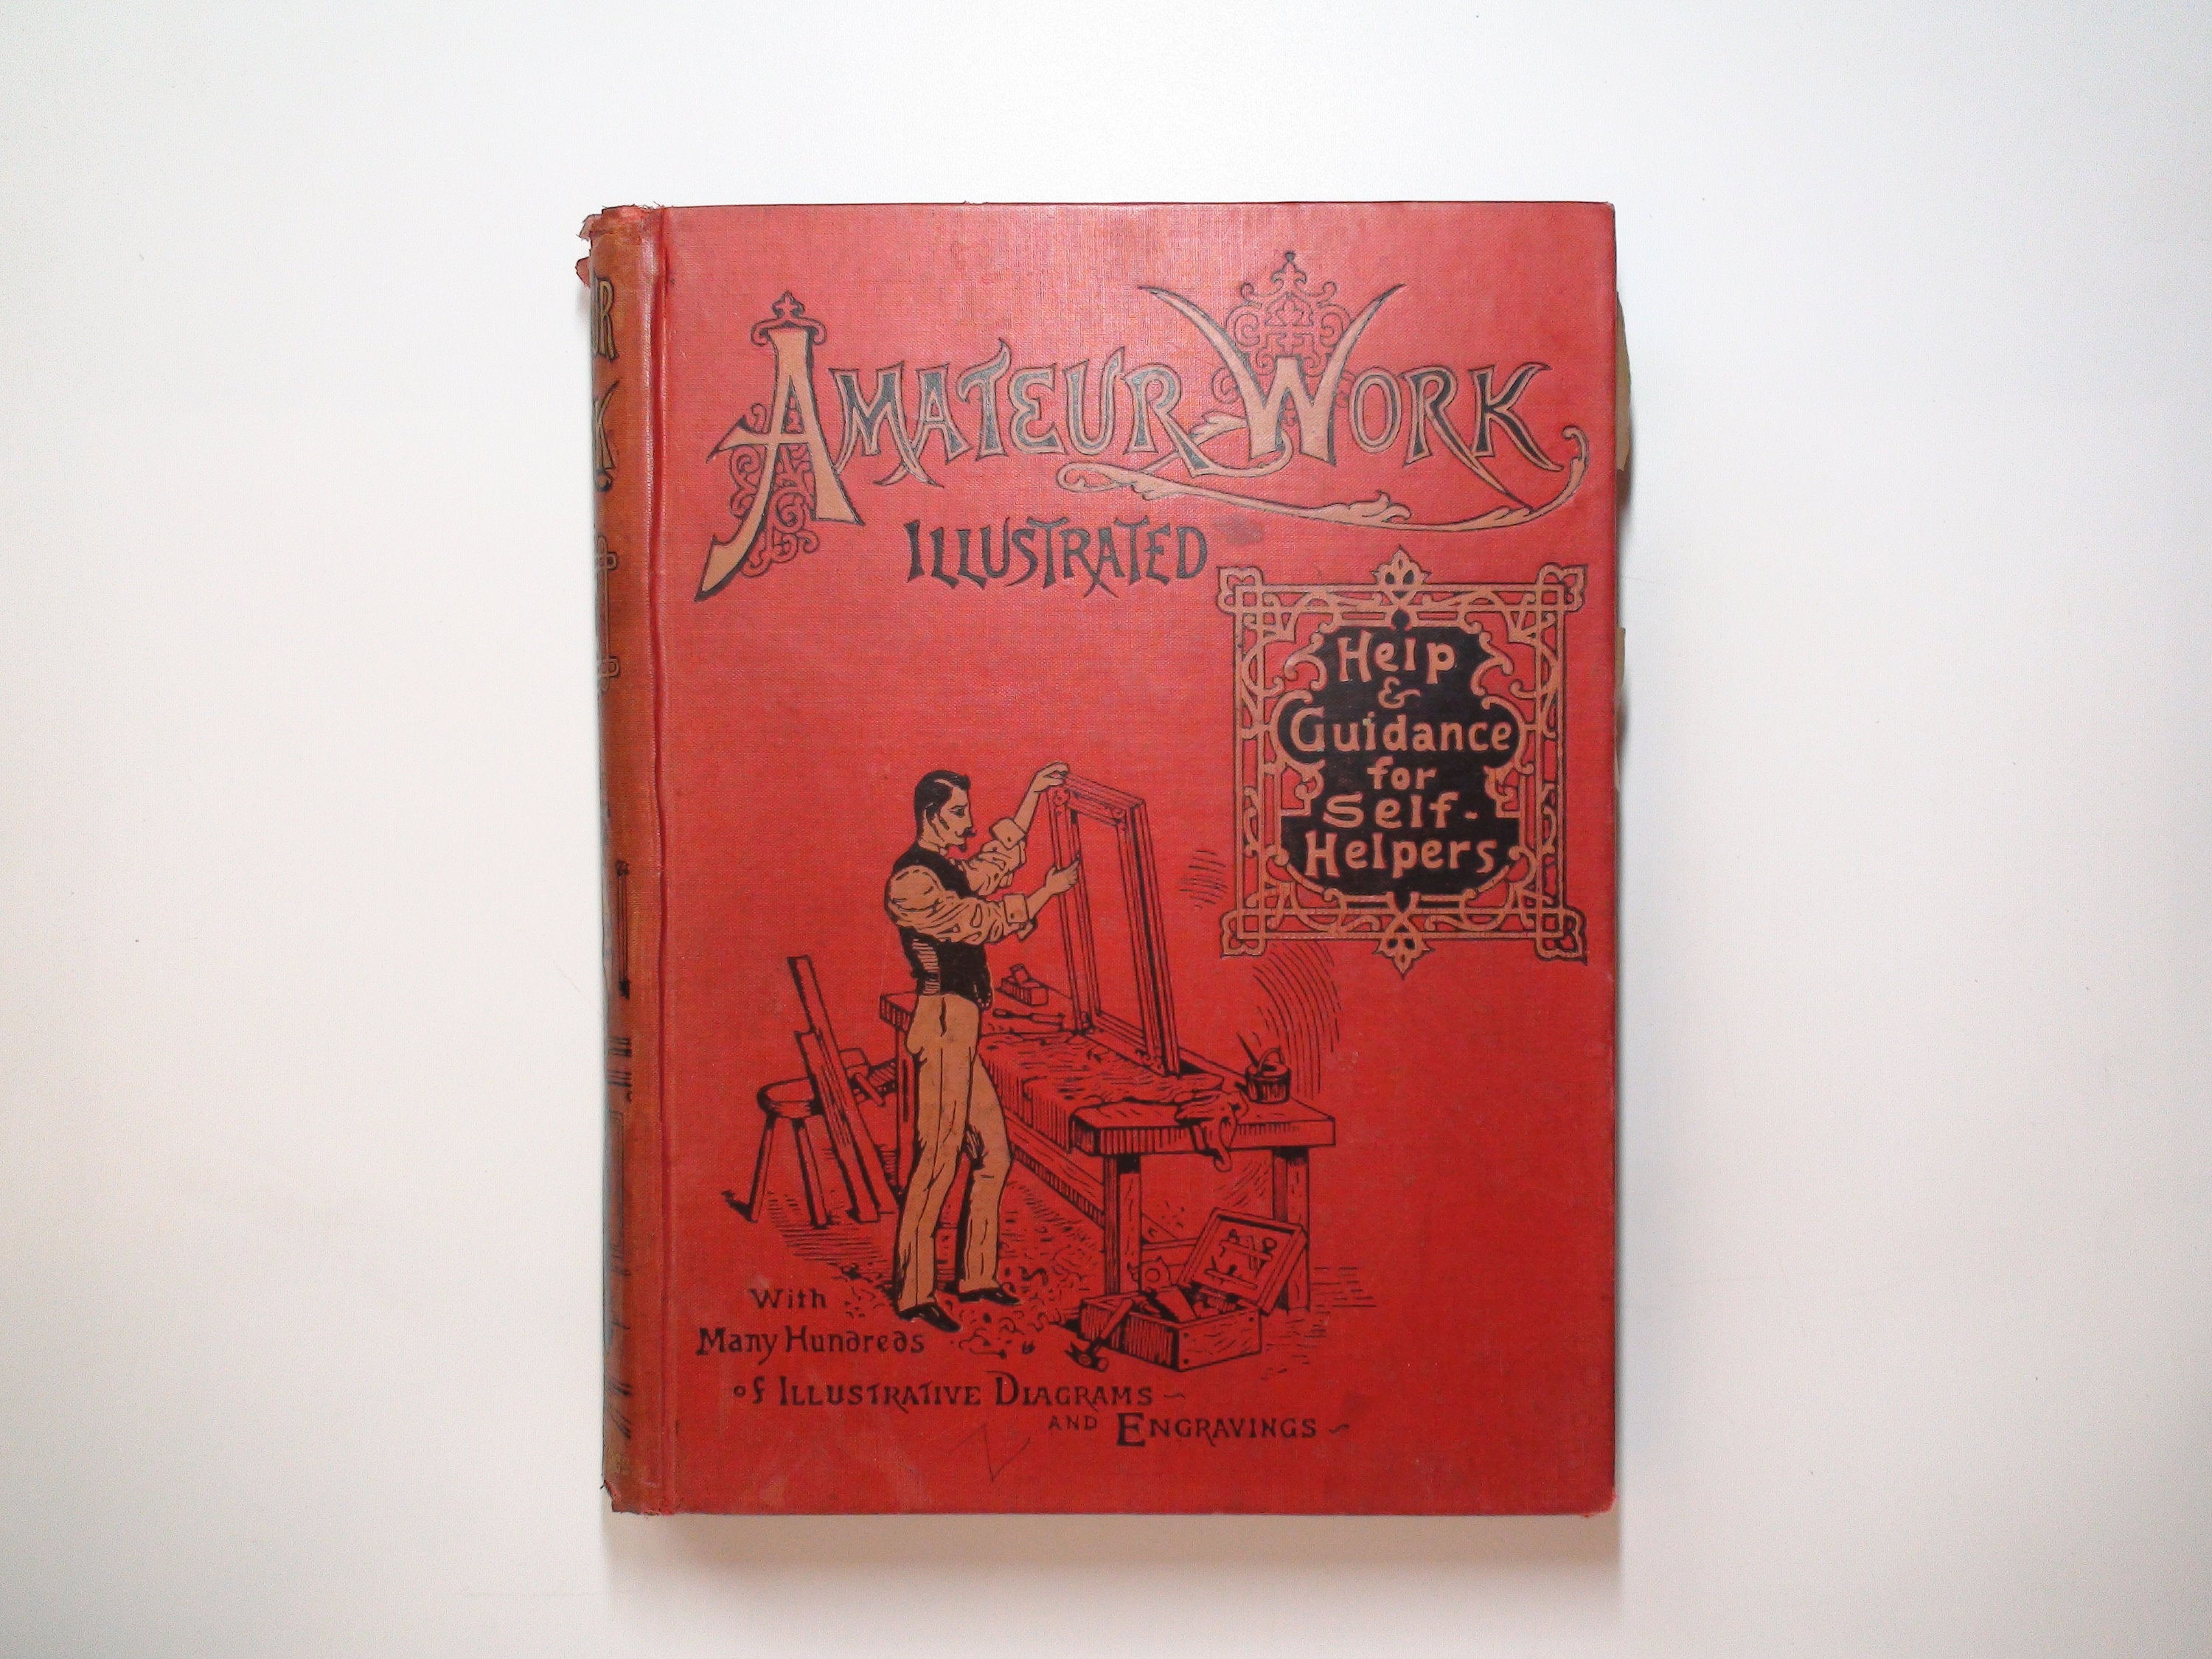 Amateur Work, Illustrated, A Practical Magazine of Manual Work, Vol II, Rare, 1895